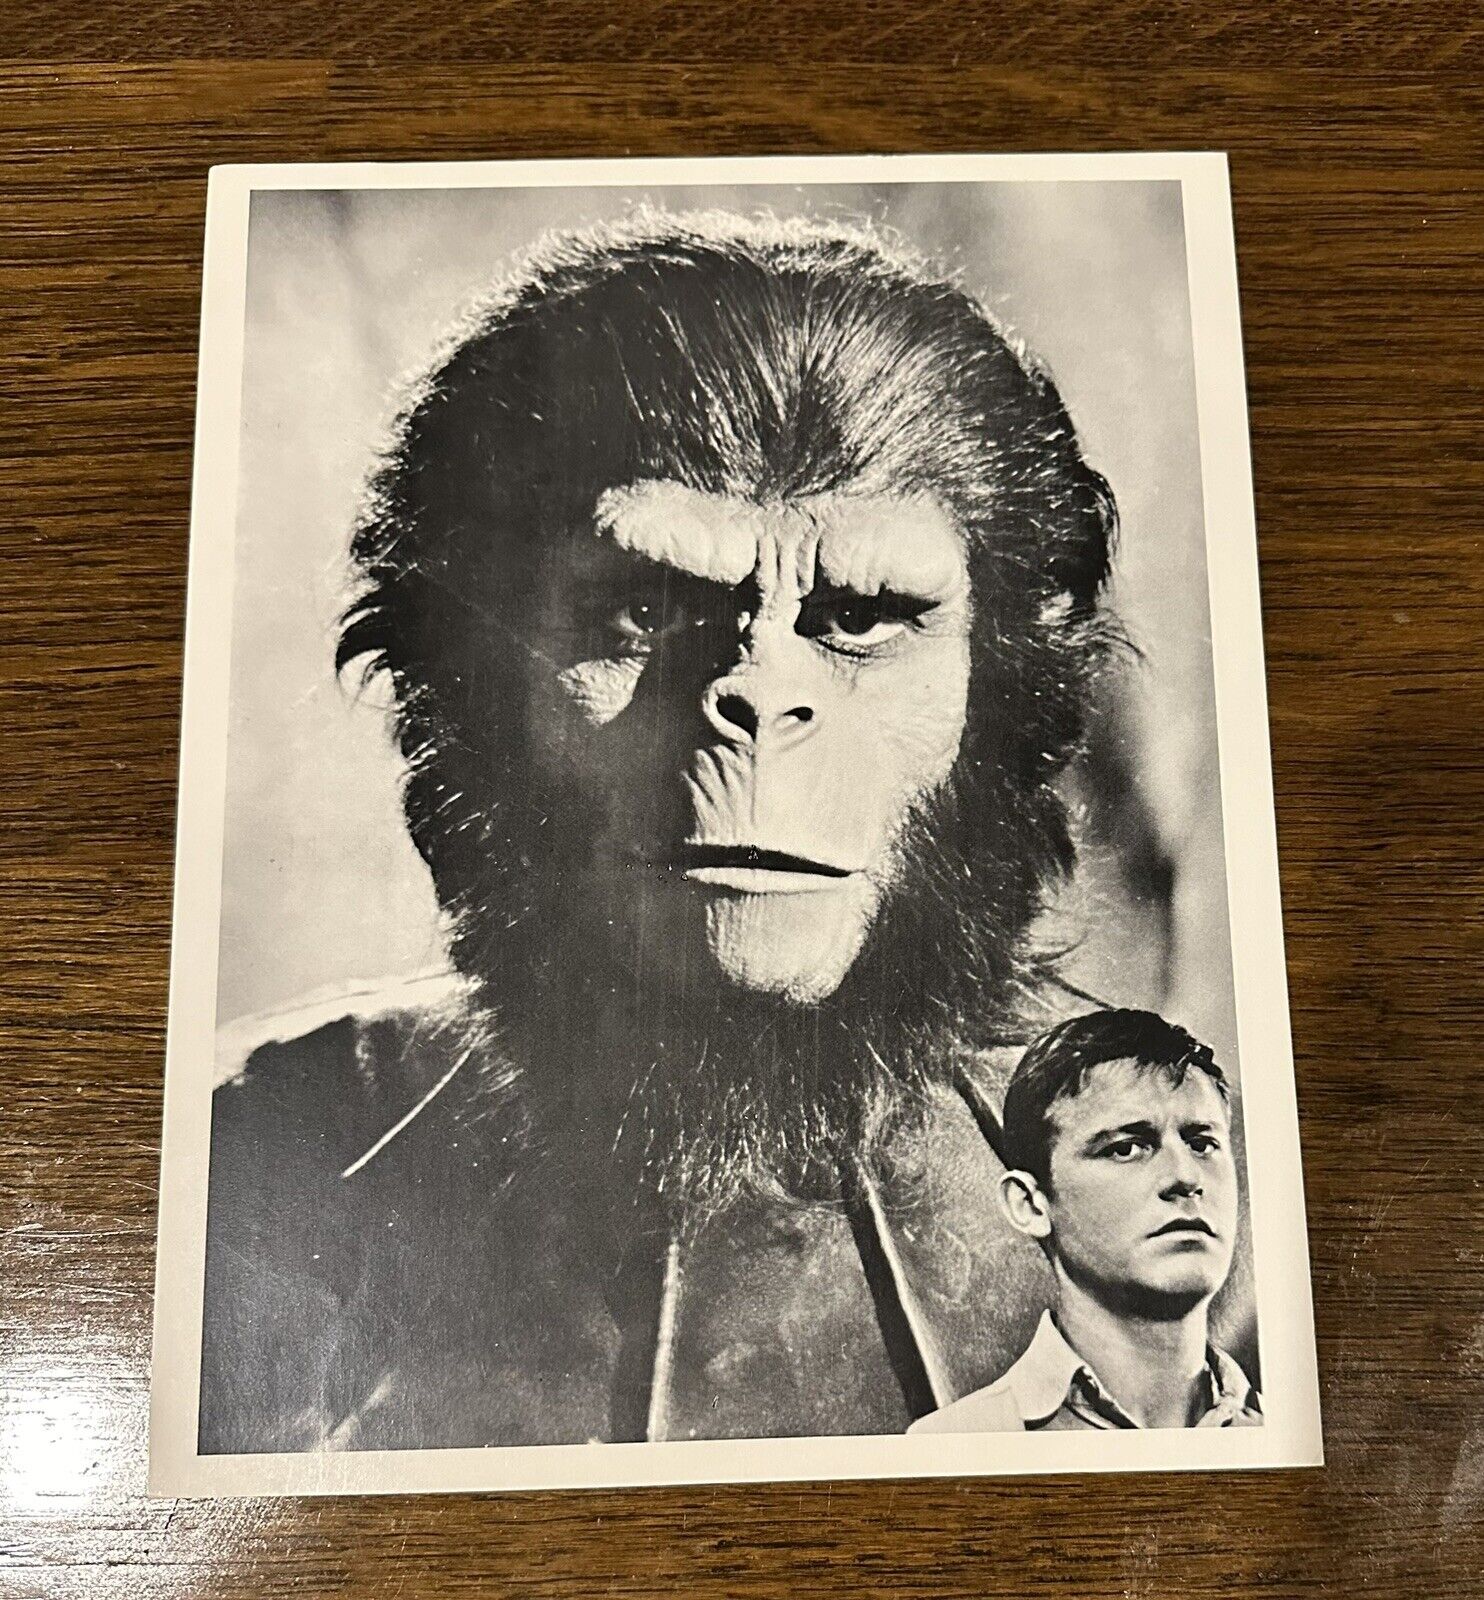 Roddy McDowall Planet of the Apes (1968)—Vintage Photograph 8 X 10 Black & White